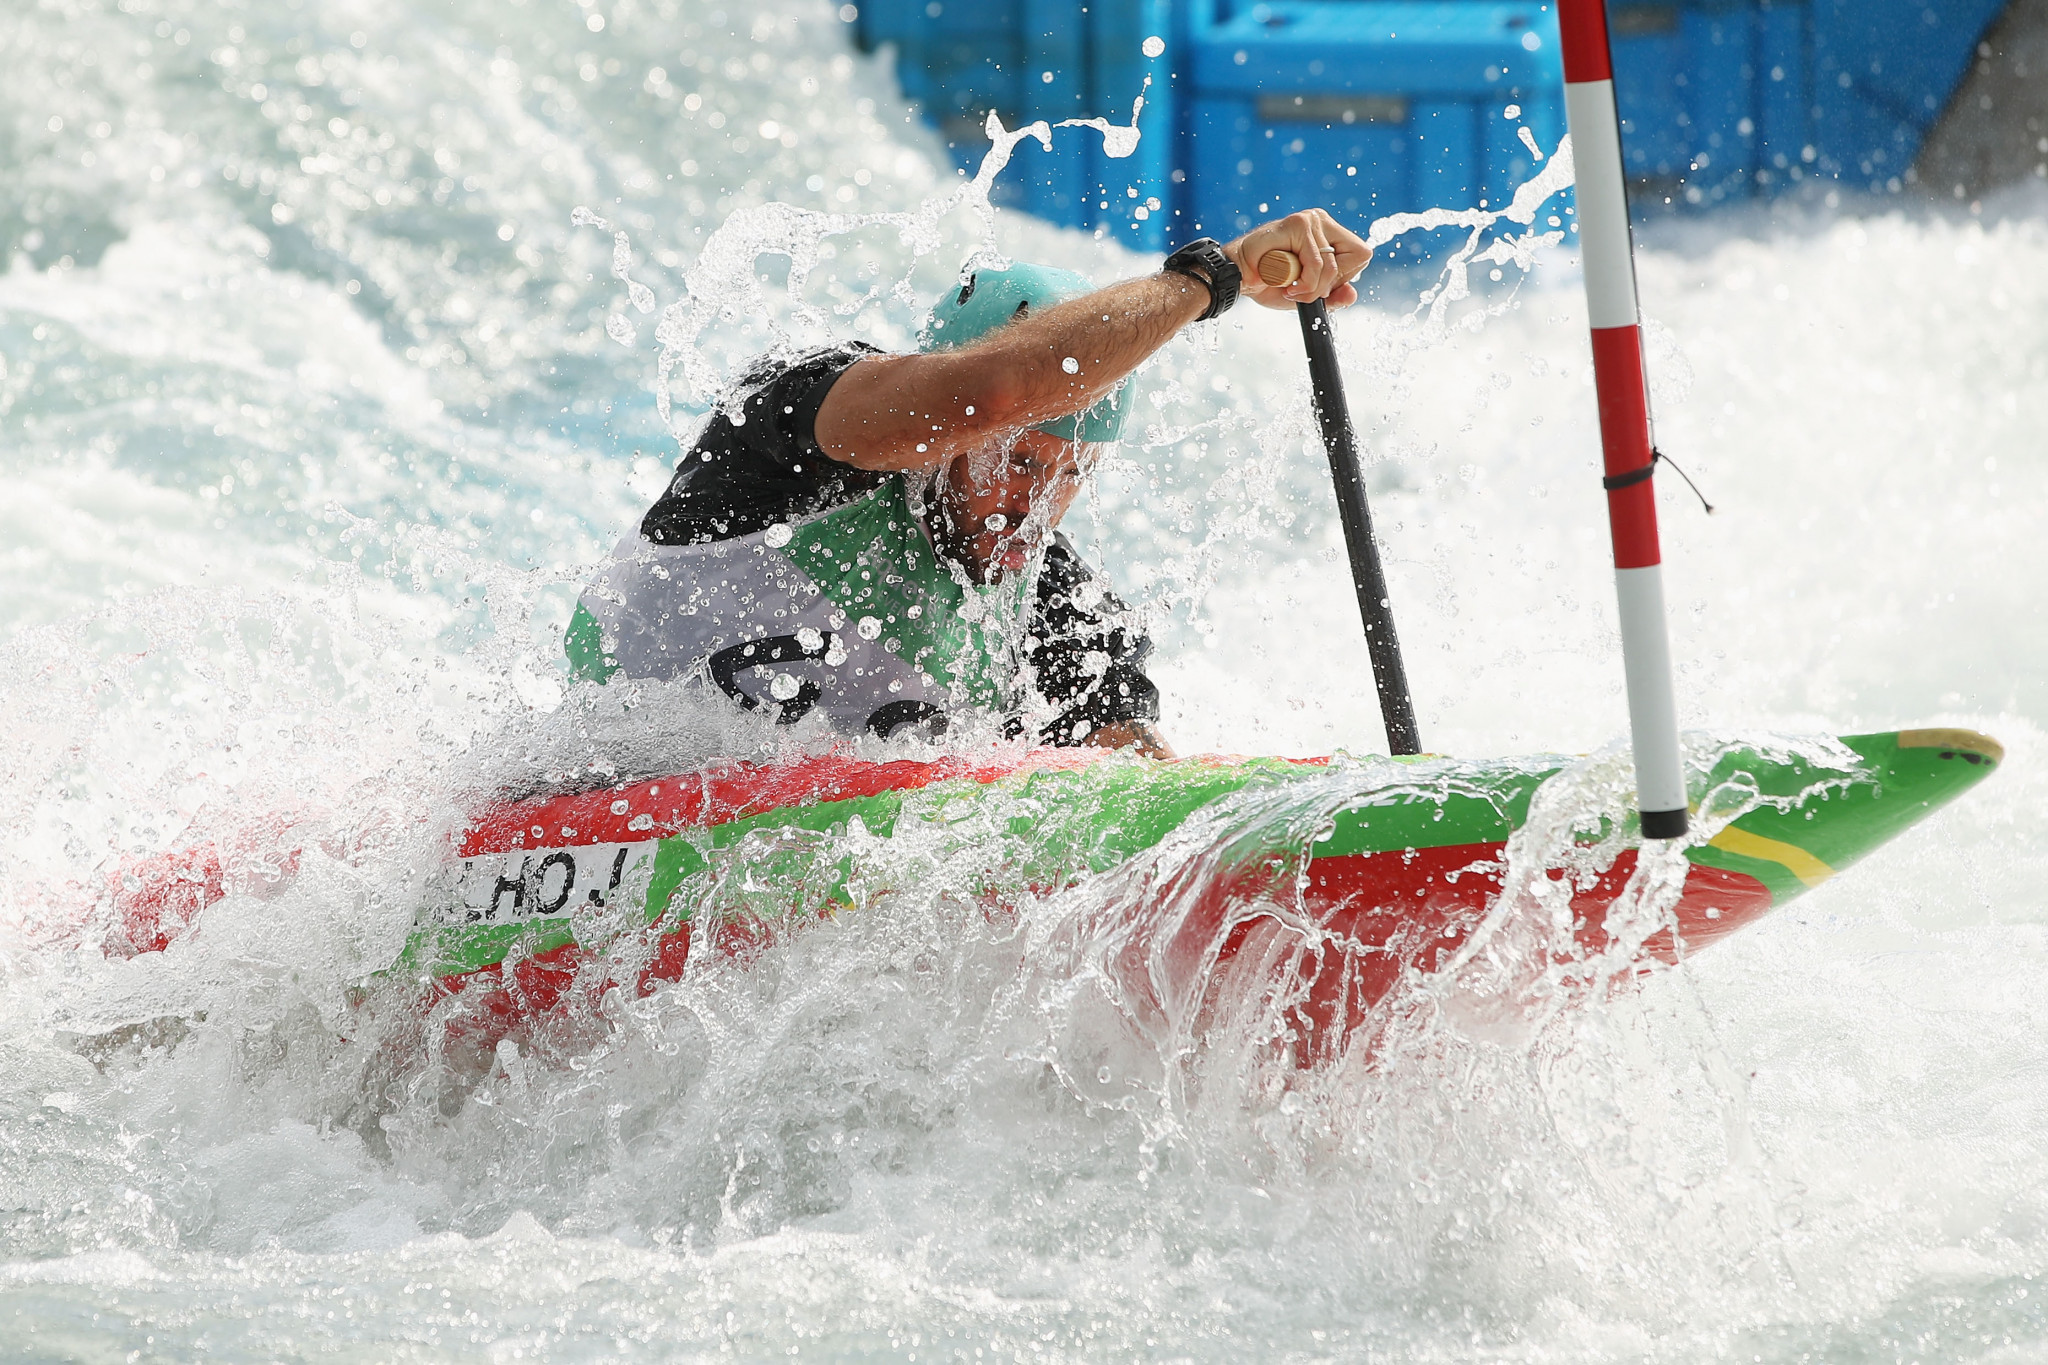 International Canoe Federation joins UN Framework Convention on Climate Change